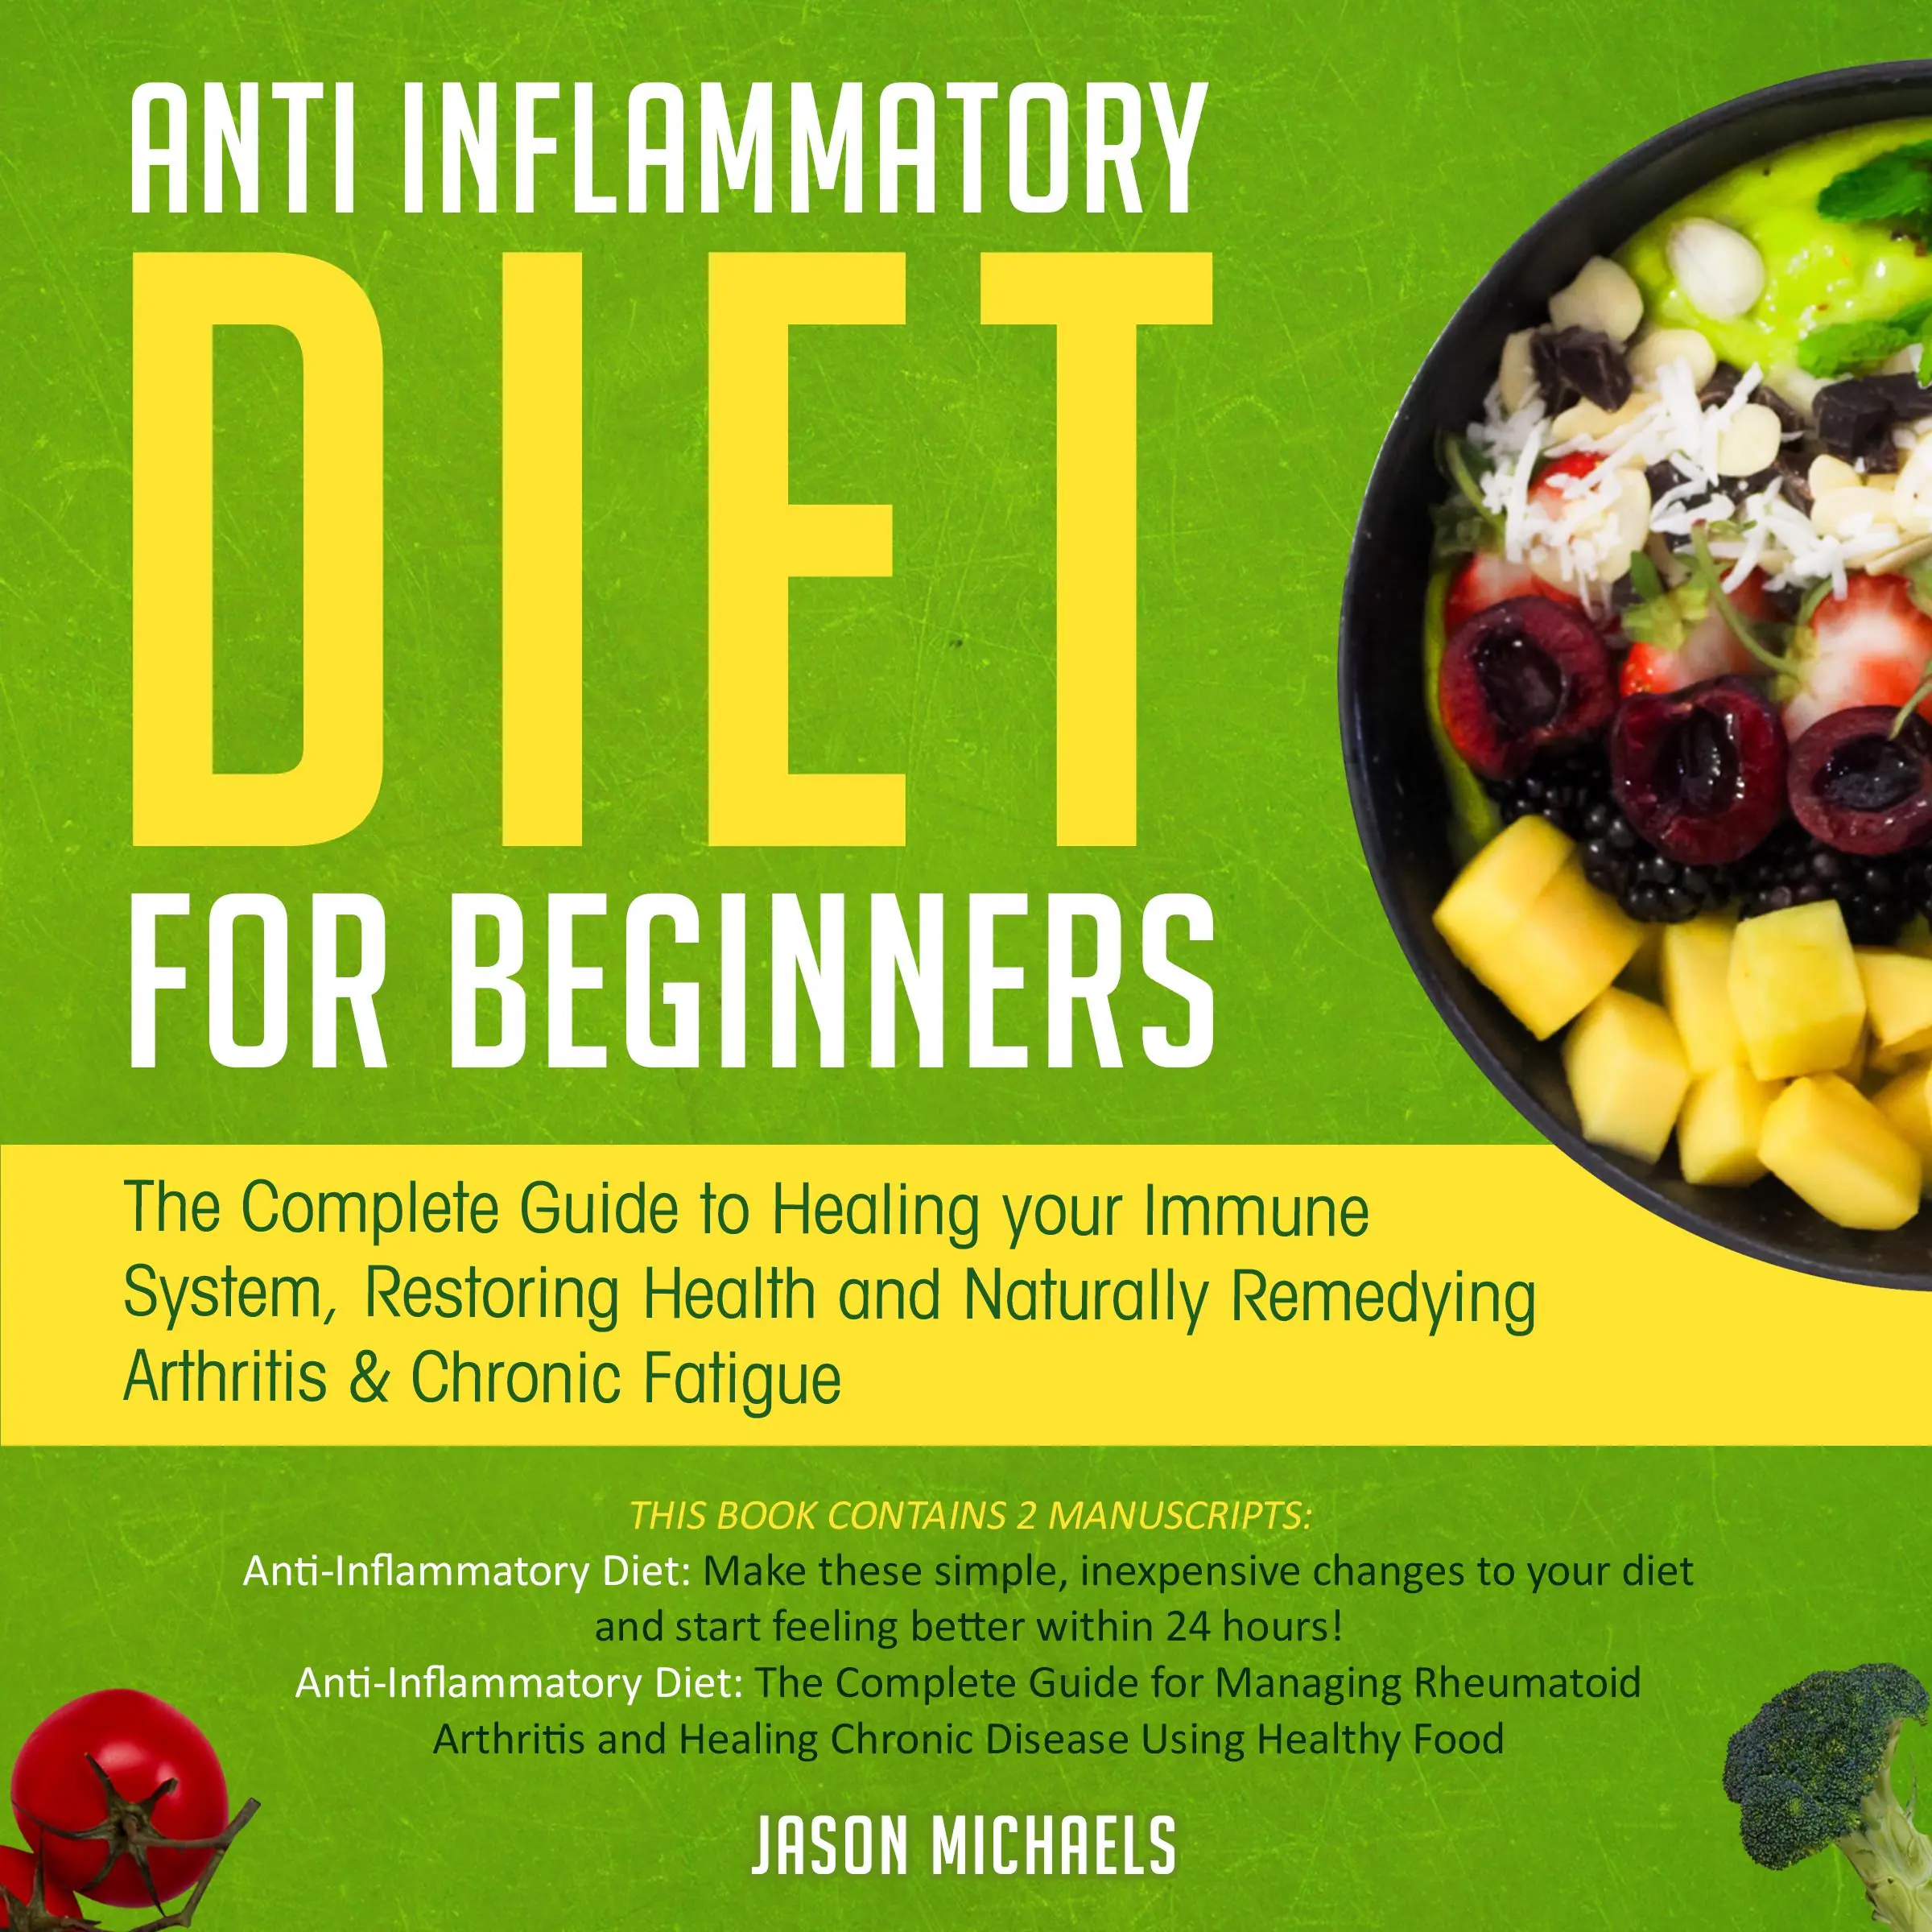 Anti-Inflammatory Diet for Beginners: The Complete Guide to Healing Your Immune System, Restoring Health and Naturally Remedying Arthritis & Chronic Fatigue Audiobook by Jason Michaels